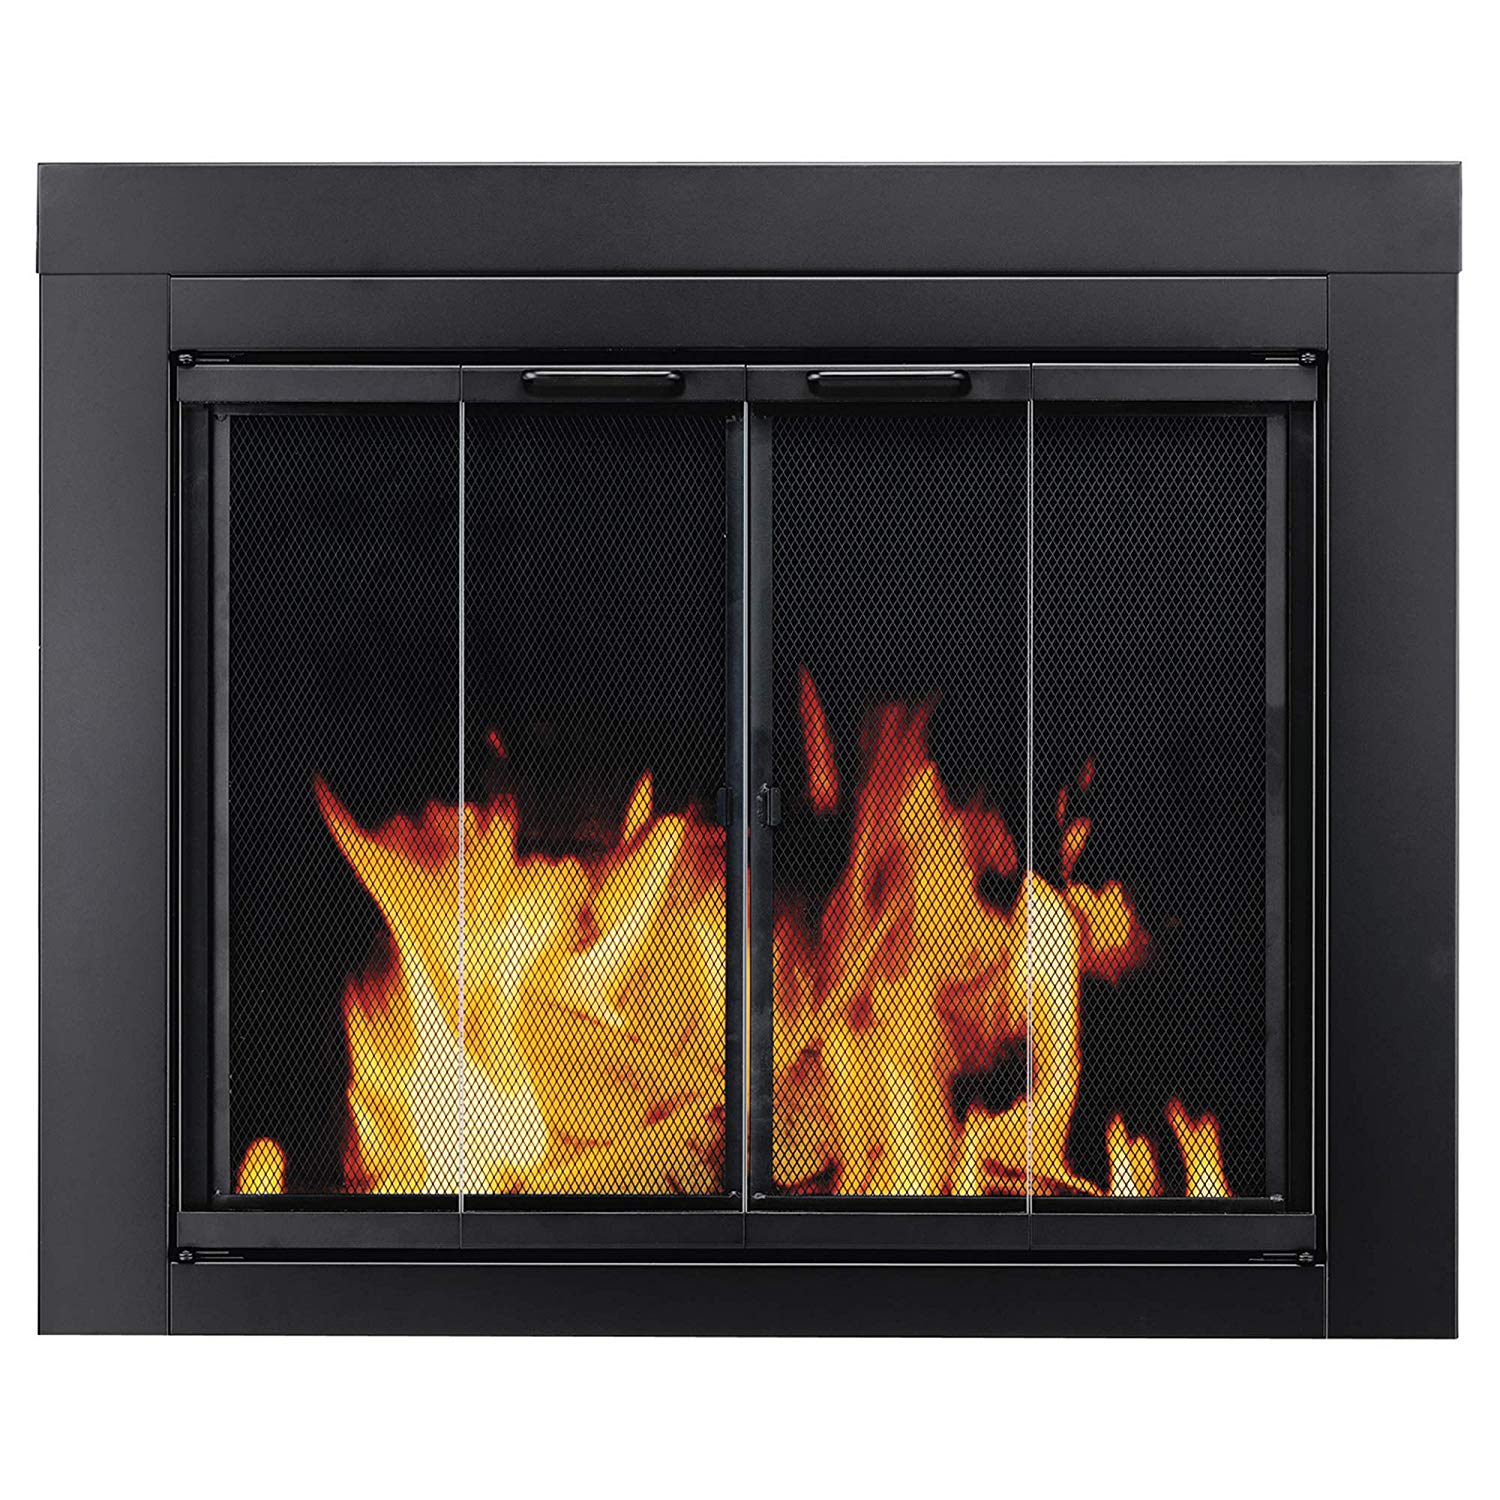 How to Turn On Gas Fireplace Fresh Pleasant Hearth at 1000 ascot Fireplace Glass Door Black Small